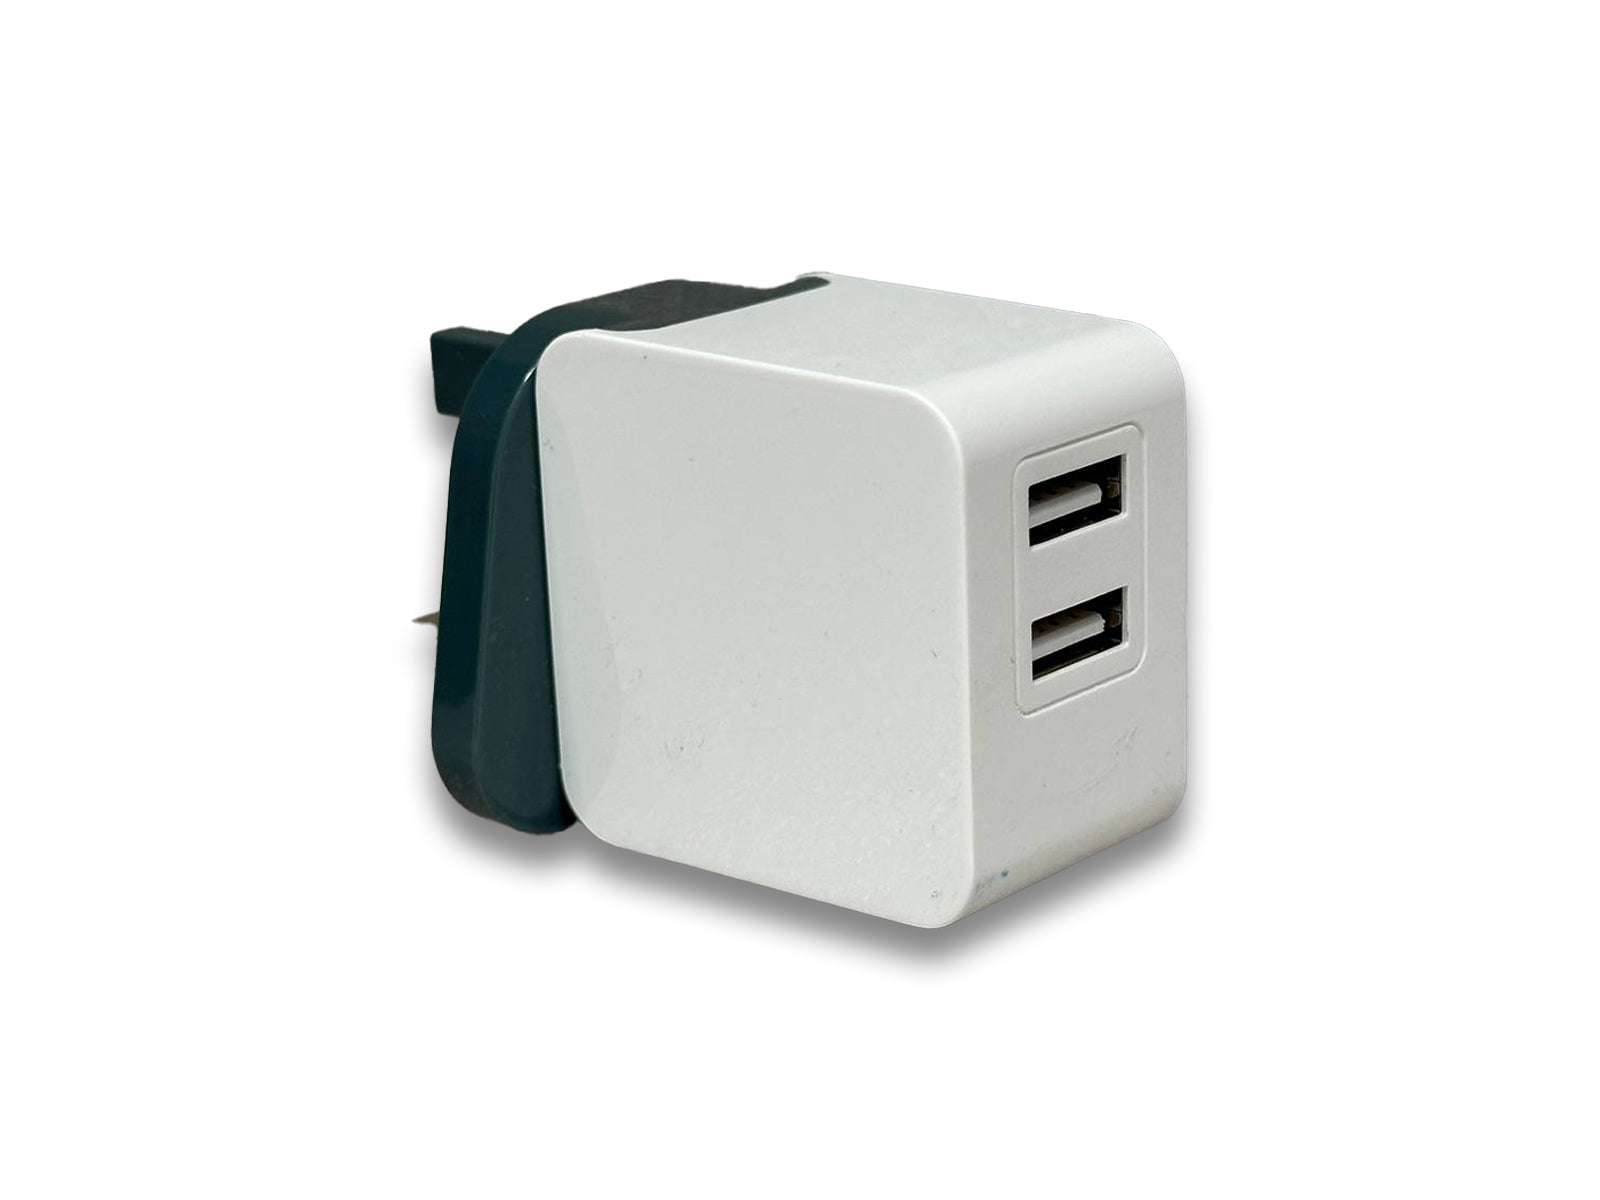 Twin USB Charger Wall Port Side View